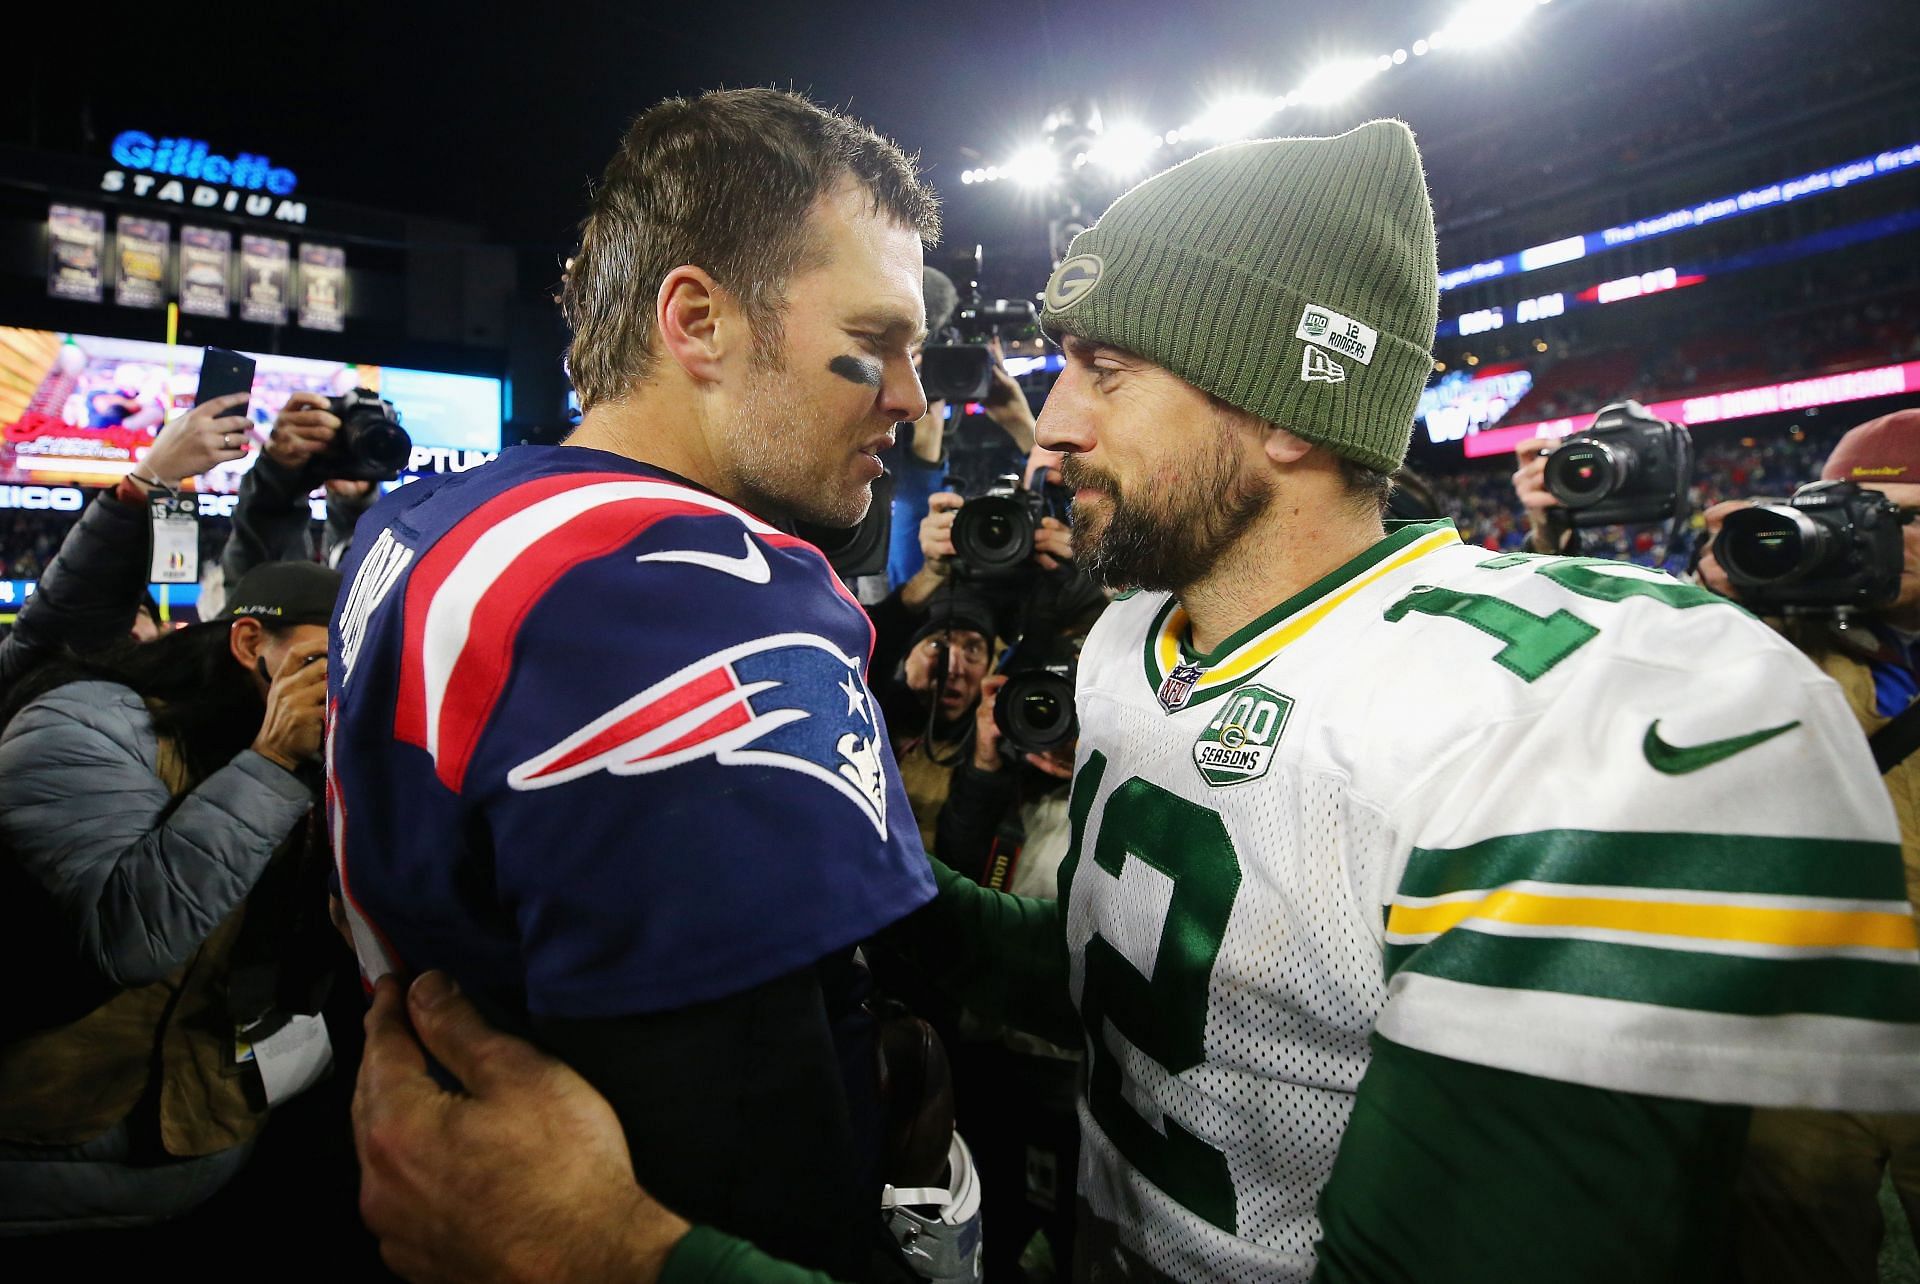 Aaron Rodgers and Tom Brady post-game